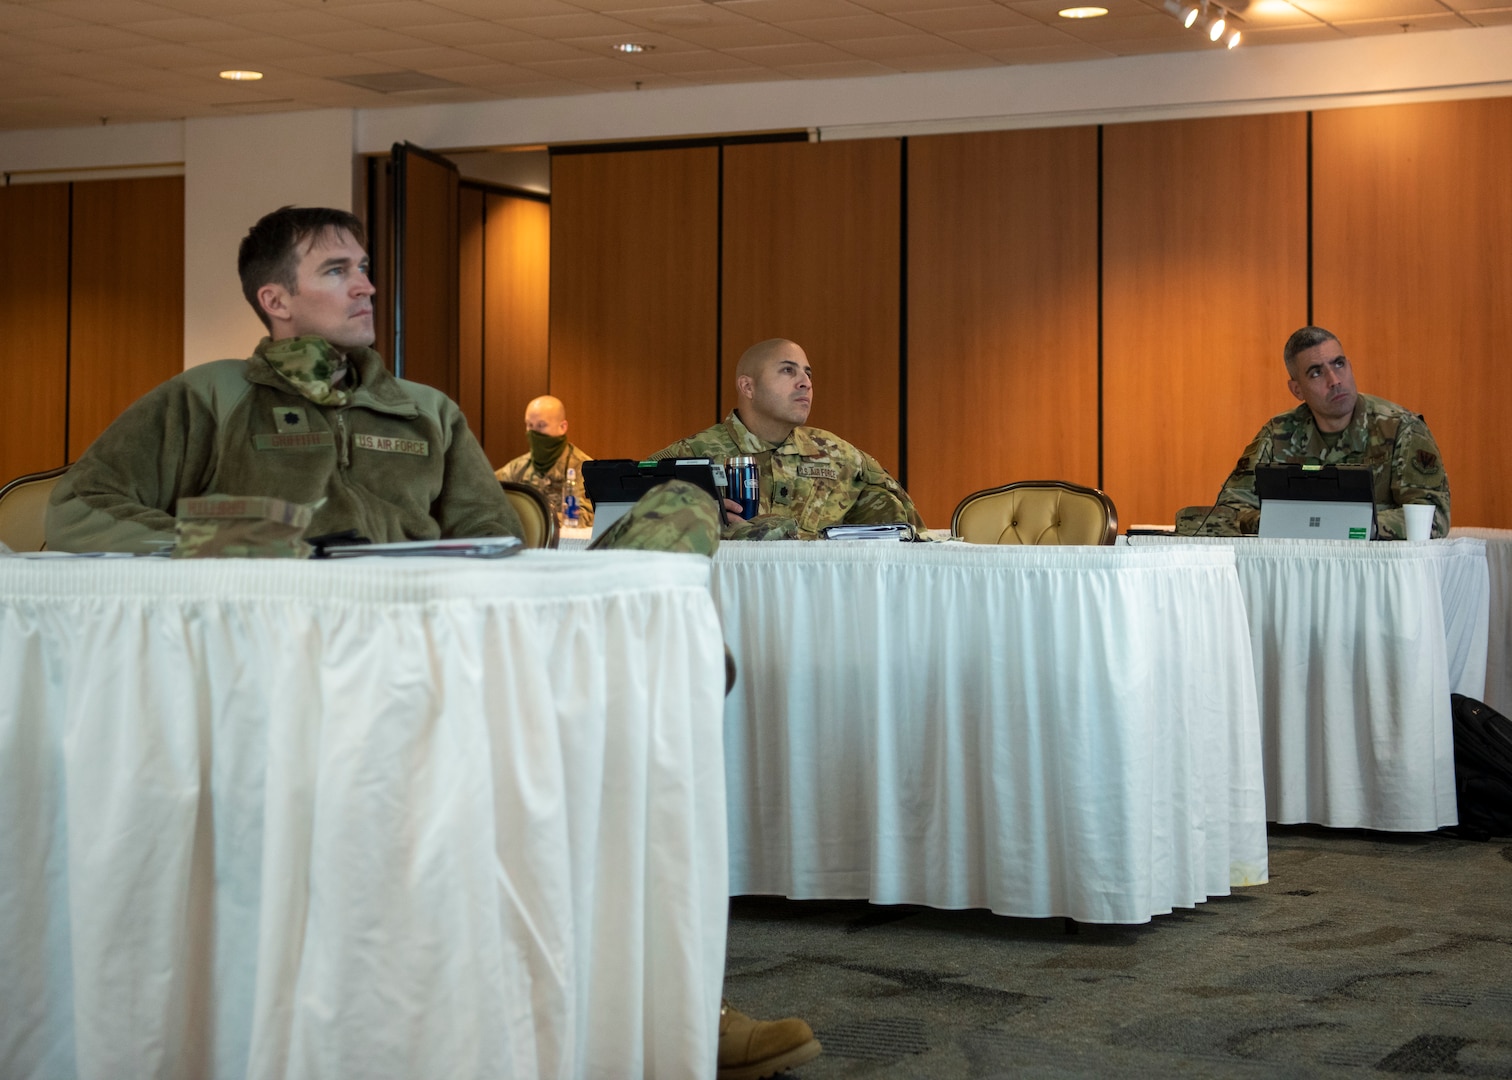 12th Air Force (Air Forces Southern) section chiefs listen to a discussion at the virtual Air Force Section Chief Theater Security Cooperation Workshop at Davis Monthan Air Force Base, Jan. 12, 2021. The AFSEC workshop brings together the Security Cooperation Office and Air Force section chiefs from U.S. Embassies throughout the U.S. Southern Command area of operations to discuss theater cooperation strategy with key enablers and stakeholders in the security cooperation enterprise.